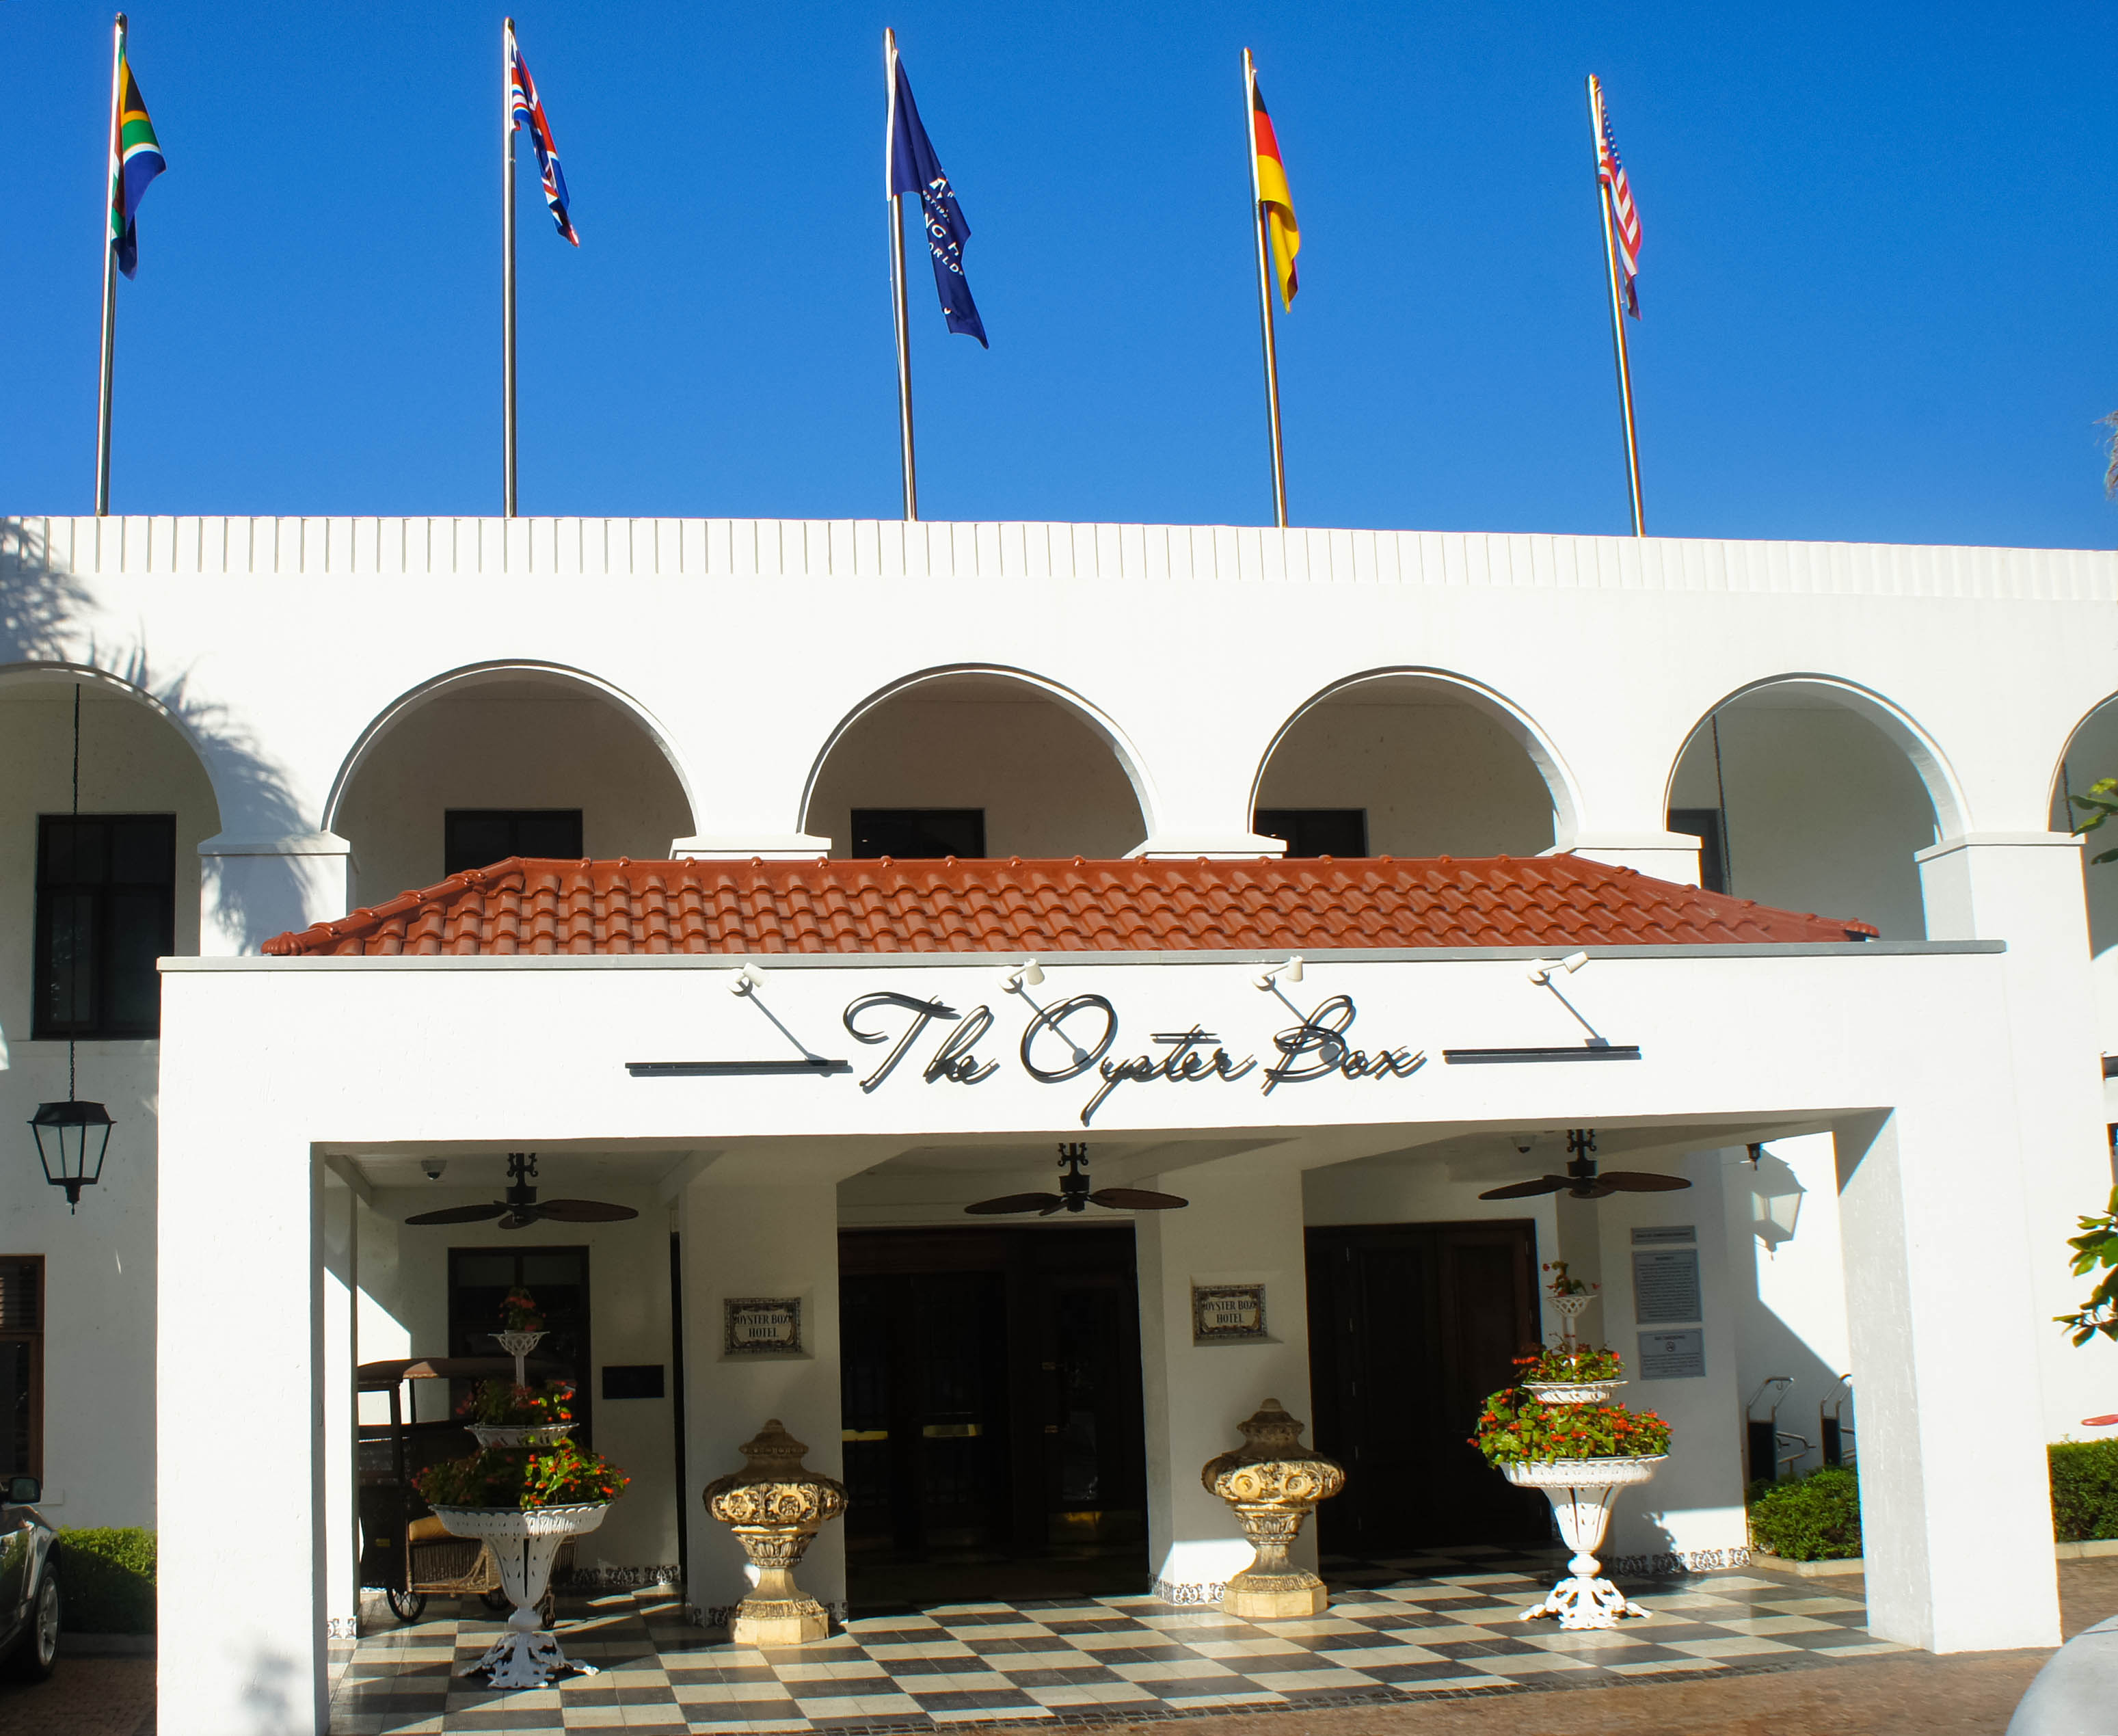 MyTravelution - The Oyster Box Hotel